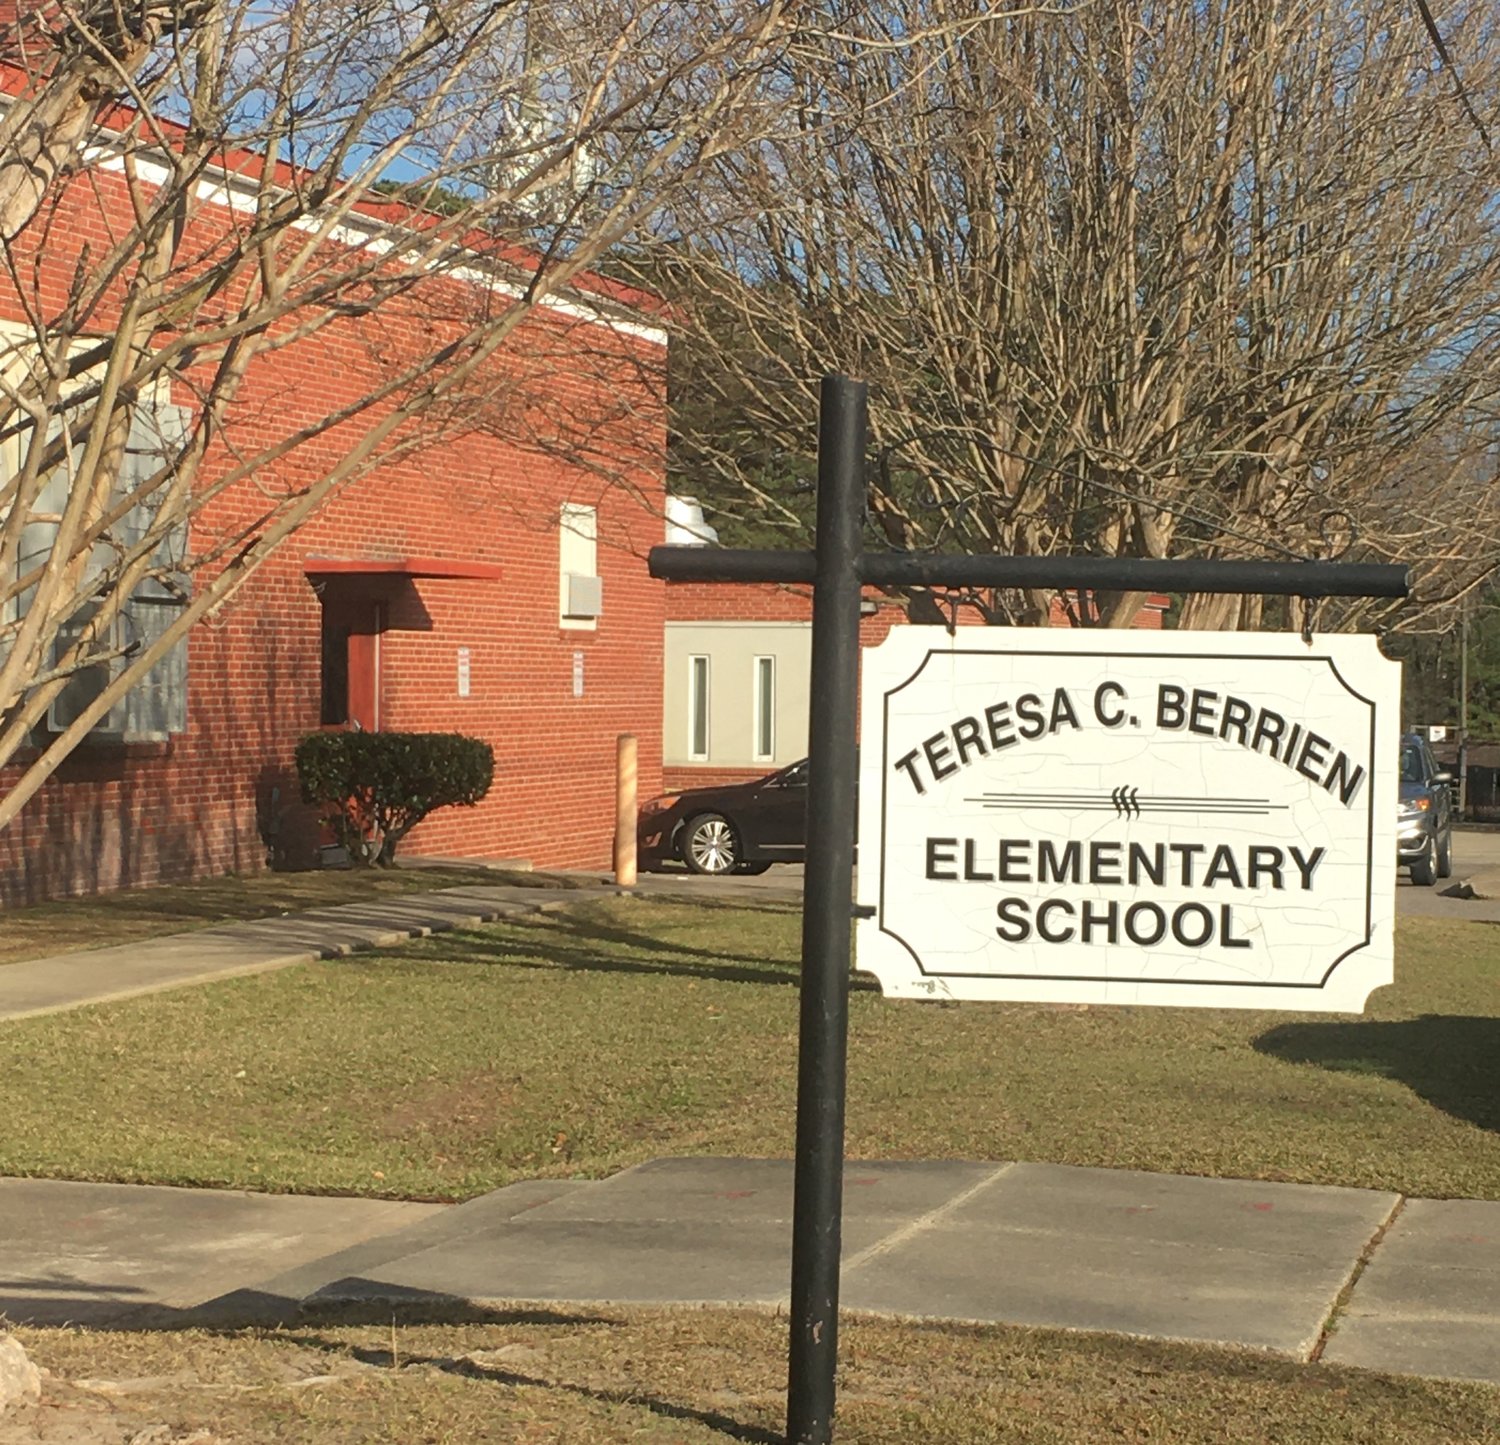 The Cumberland County school board continues to move forward with the possibility of closing T.C. Berrien Elementary School. The board has scheduled meetings this month to get input from parents about preliminary reassignment plans.